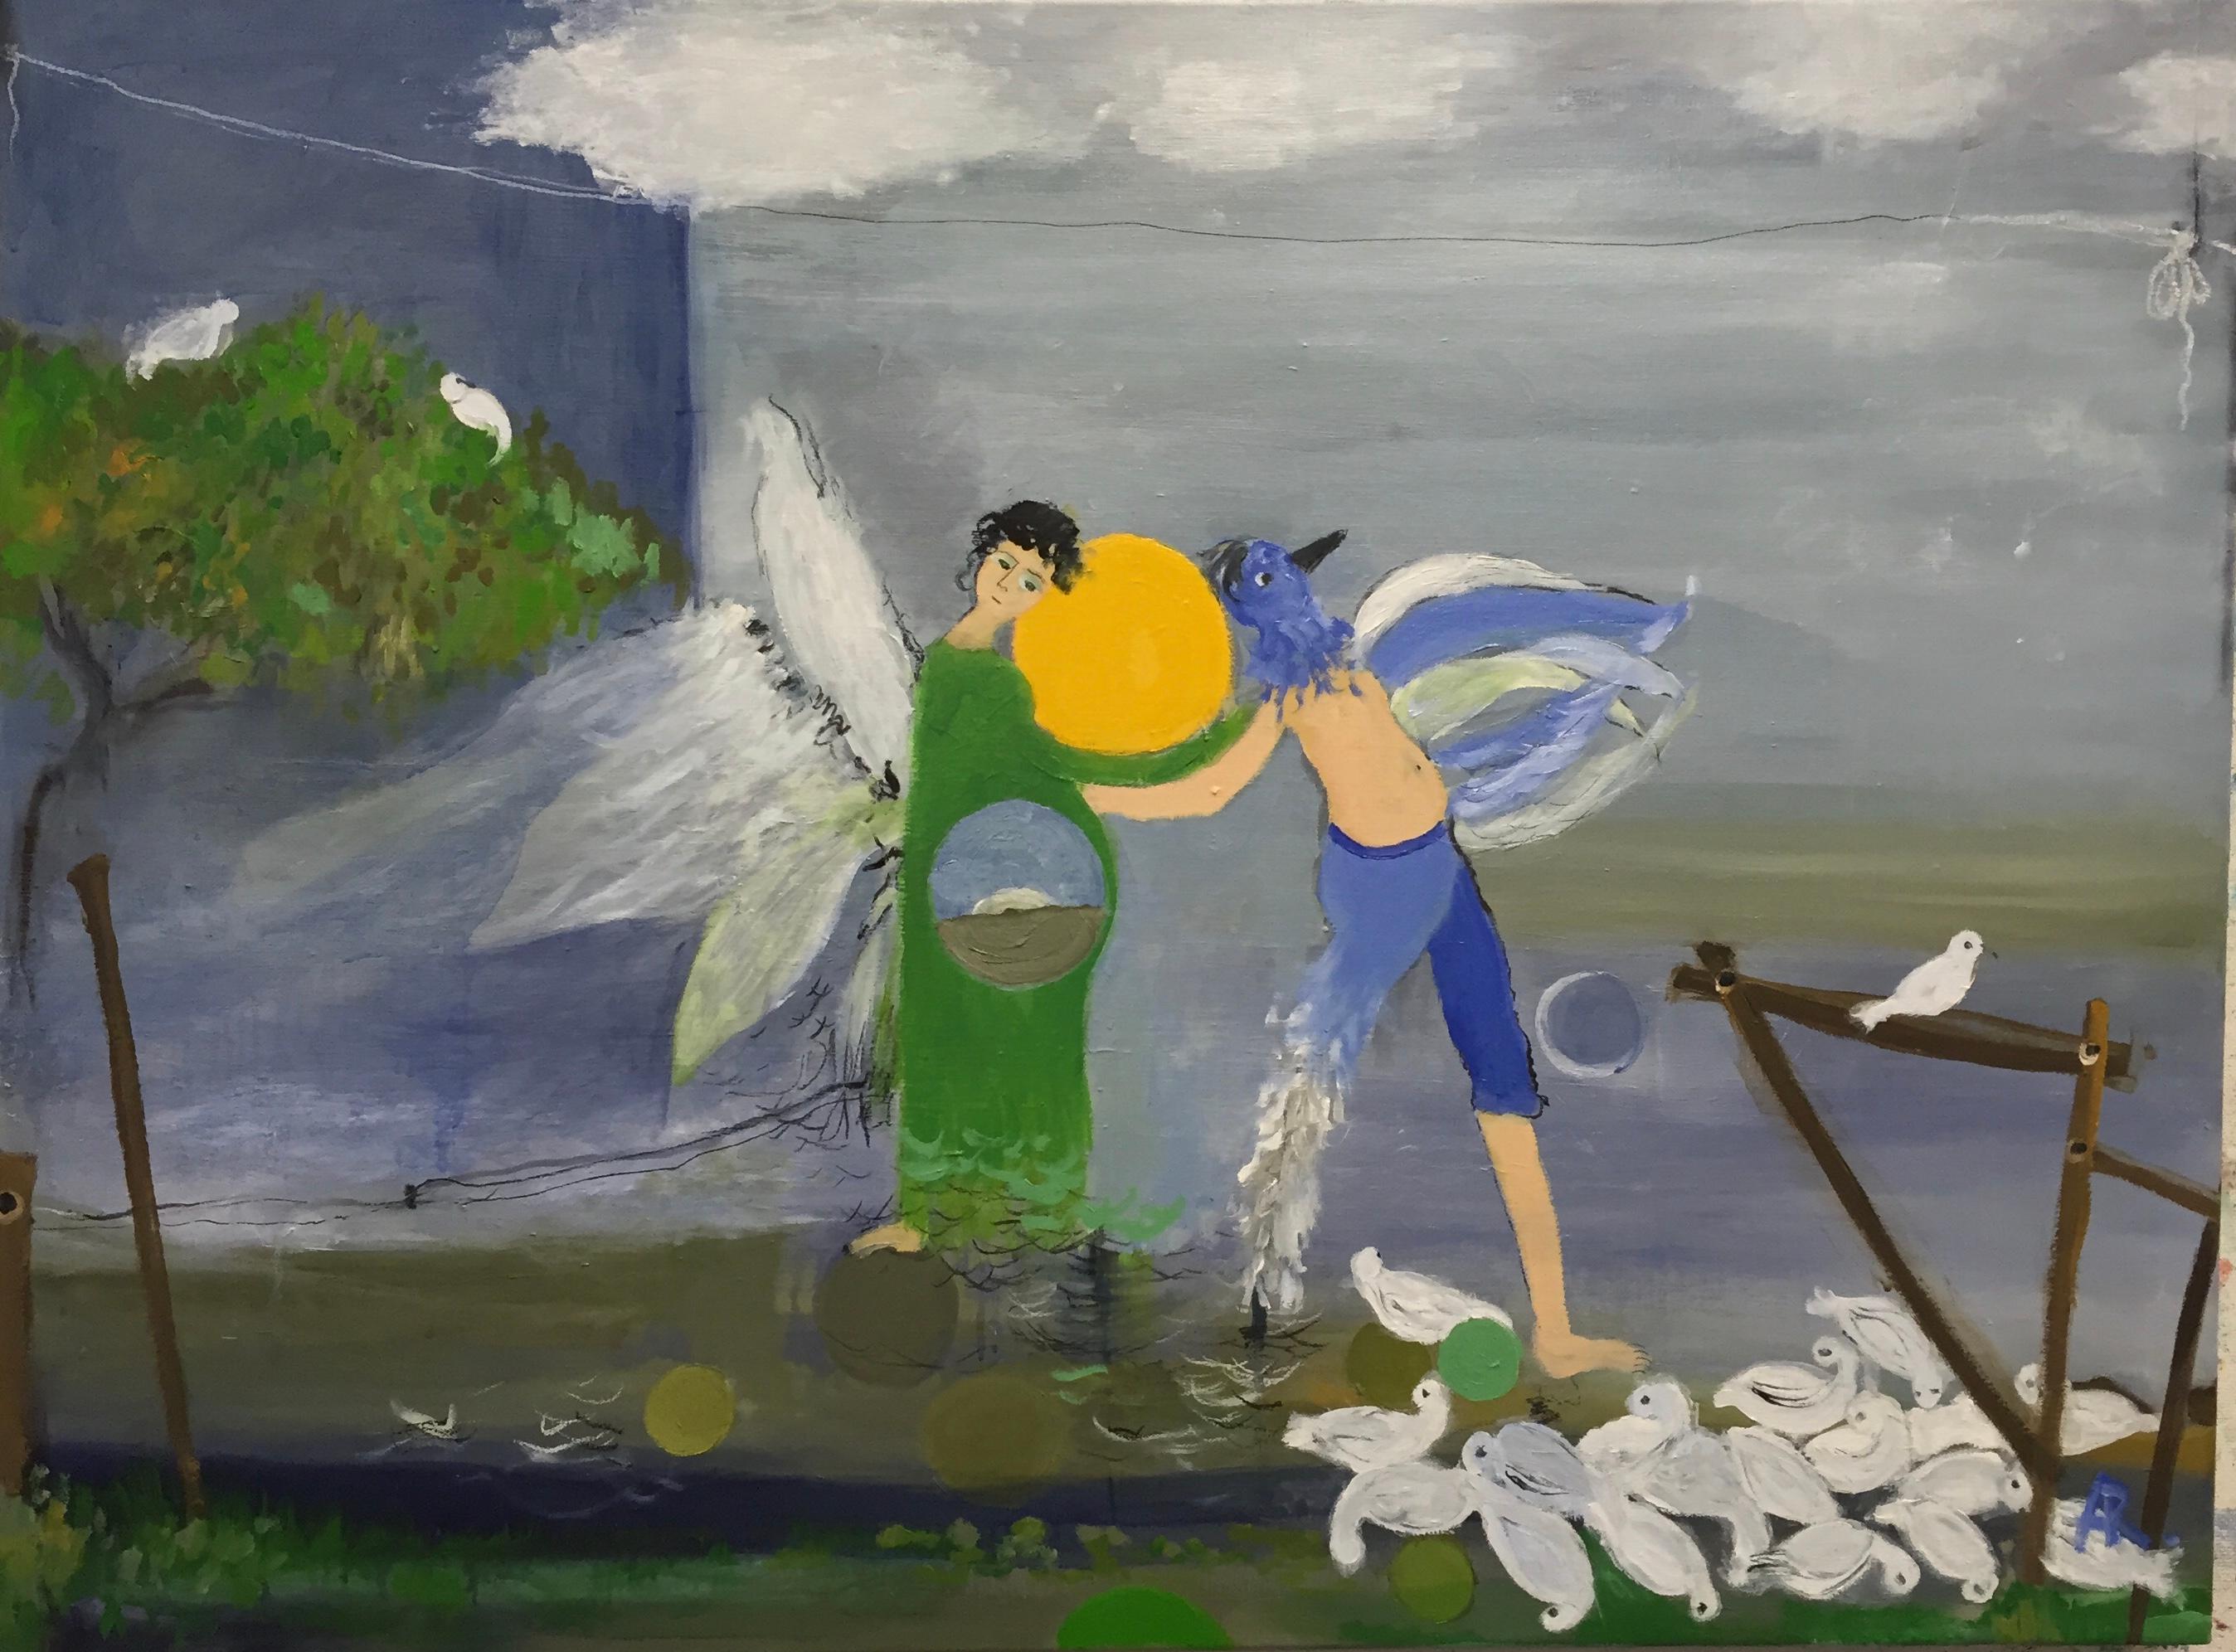 Alexandra Rozenman Landscape Painting - "After the War", surreal, birds, white, yellow, green, blue, oil painting